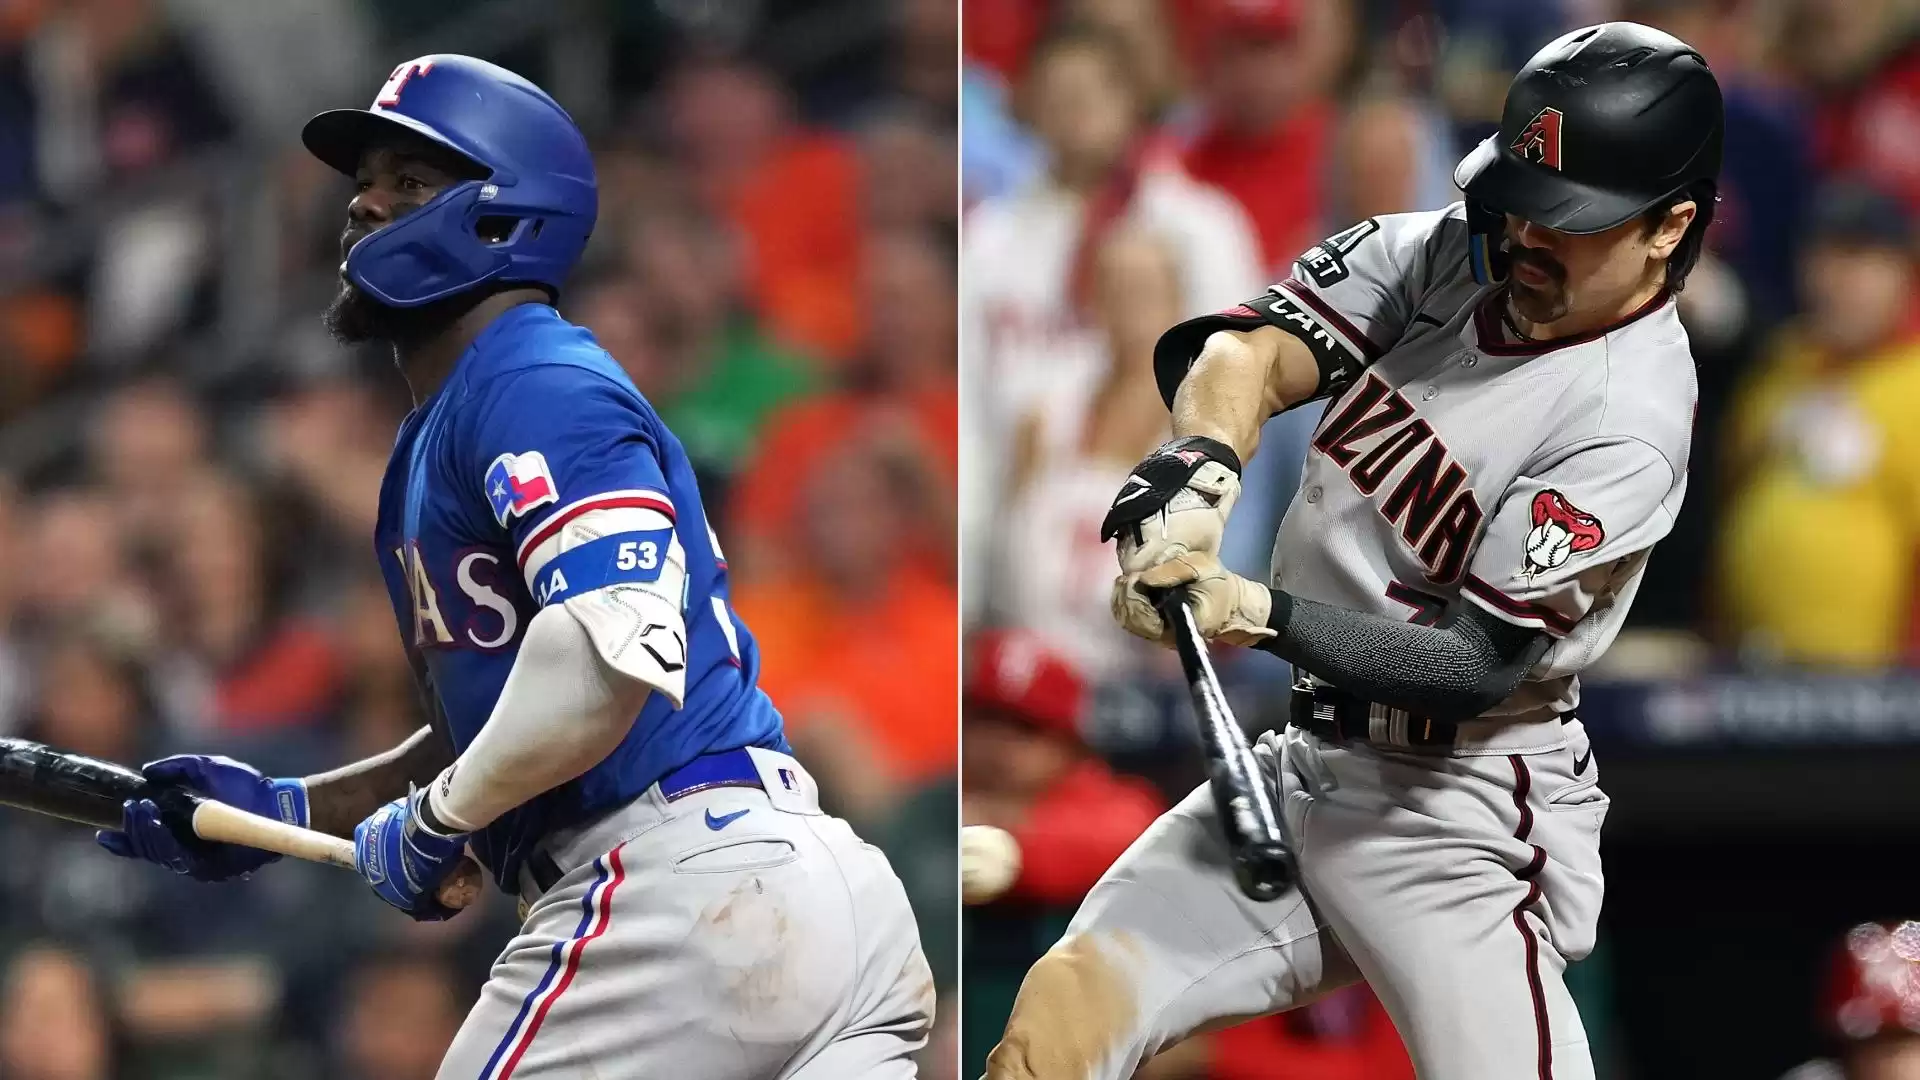 World Series Today: Channel, Time, TV Schedule to Watch Rangers vs. Diamondbacks Game 3